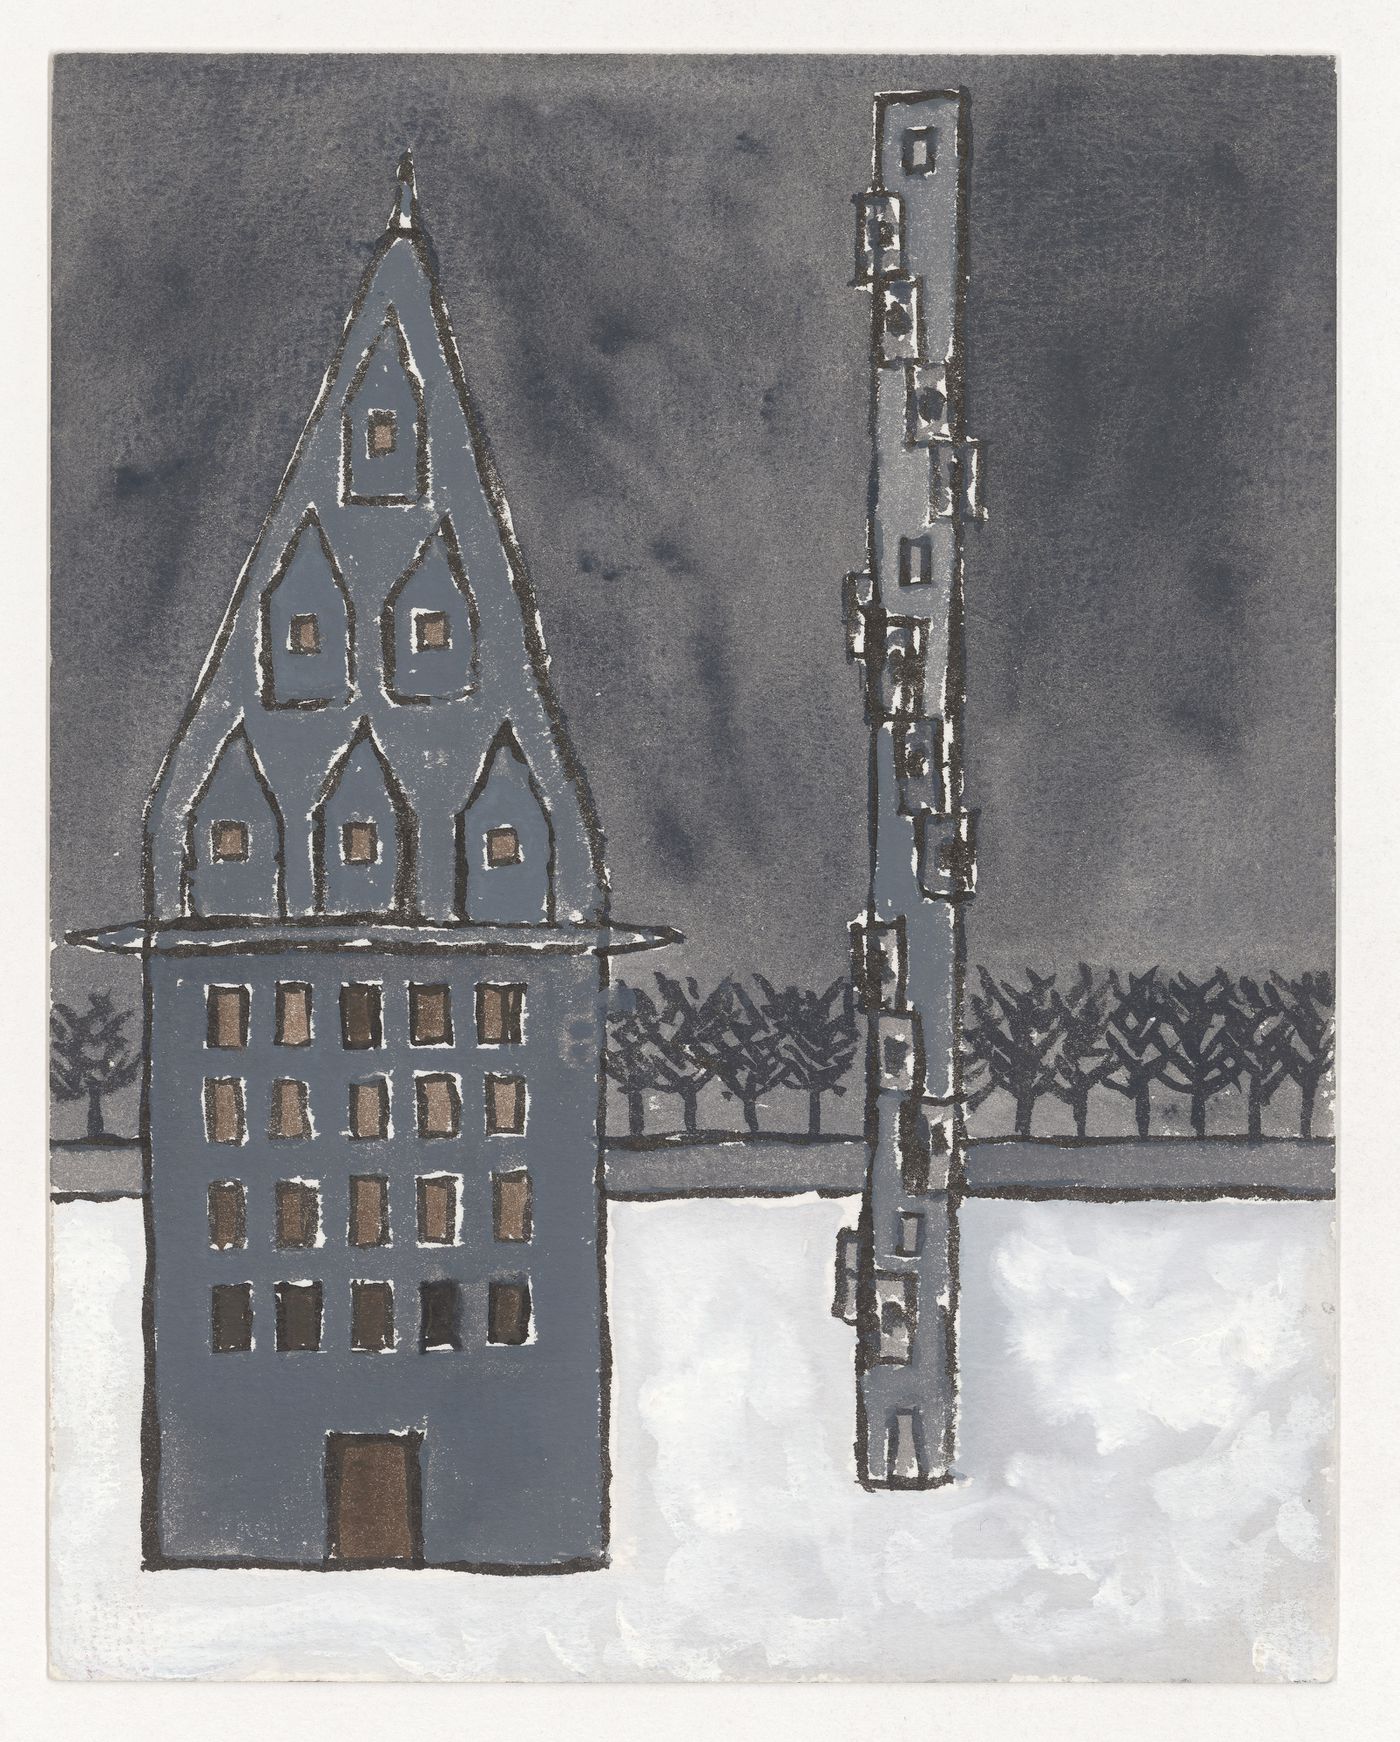 Painting for Berlin Night depicting Center for Historical Investigations Regarding the Collapse of Time and Tower of Reading Carrels